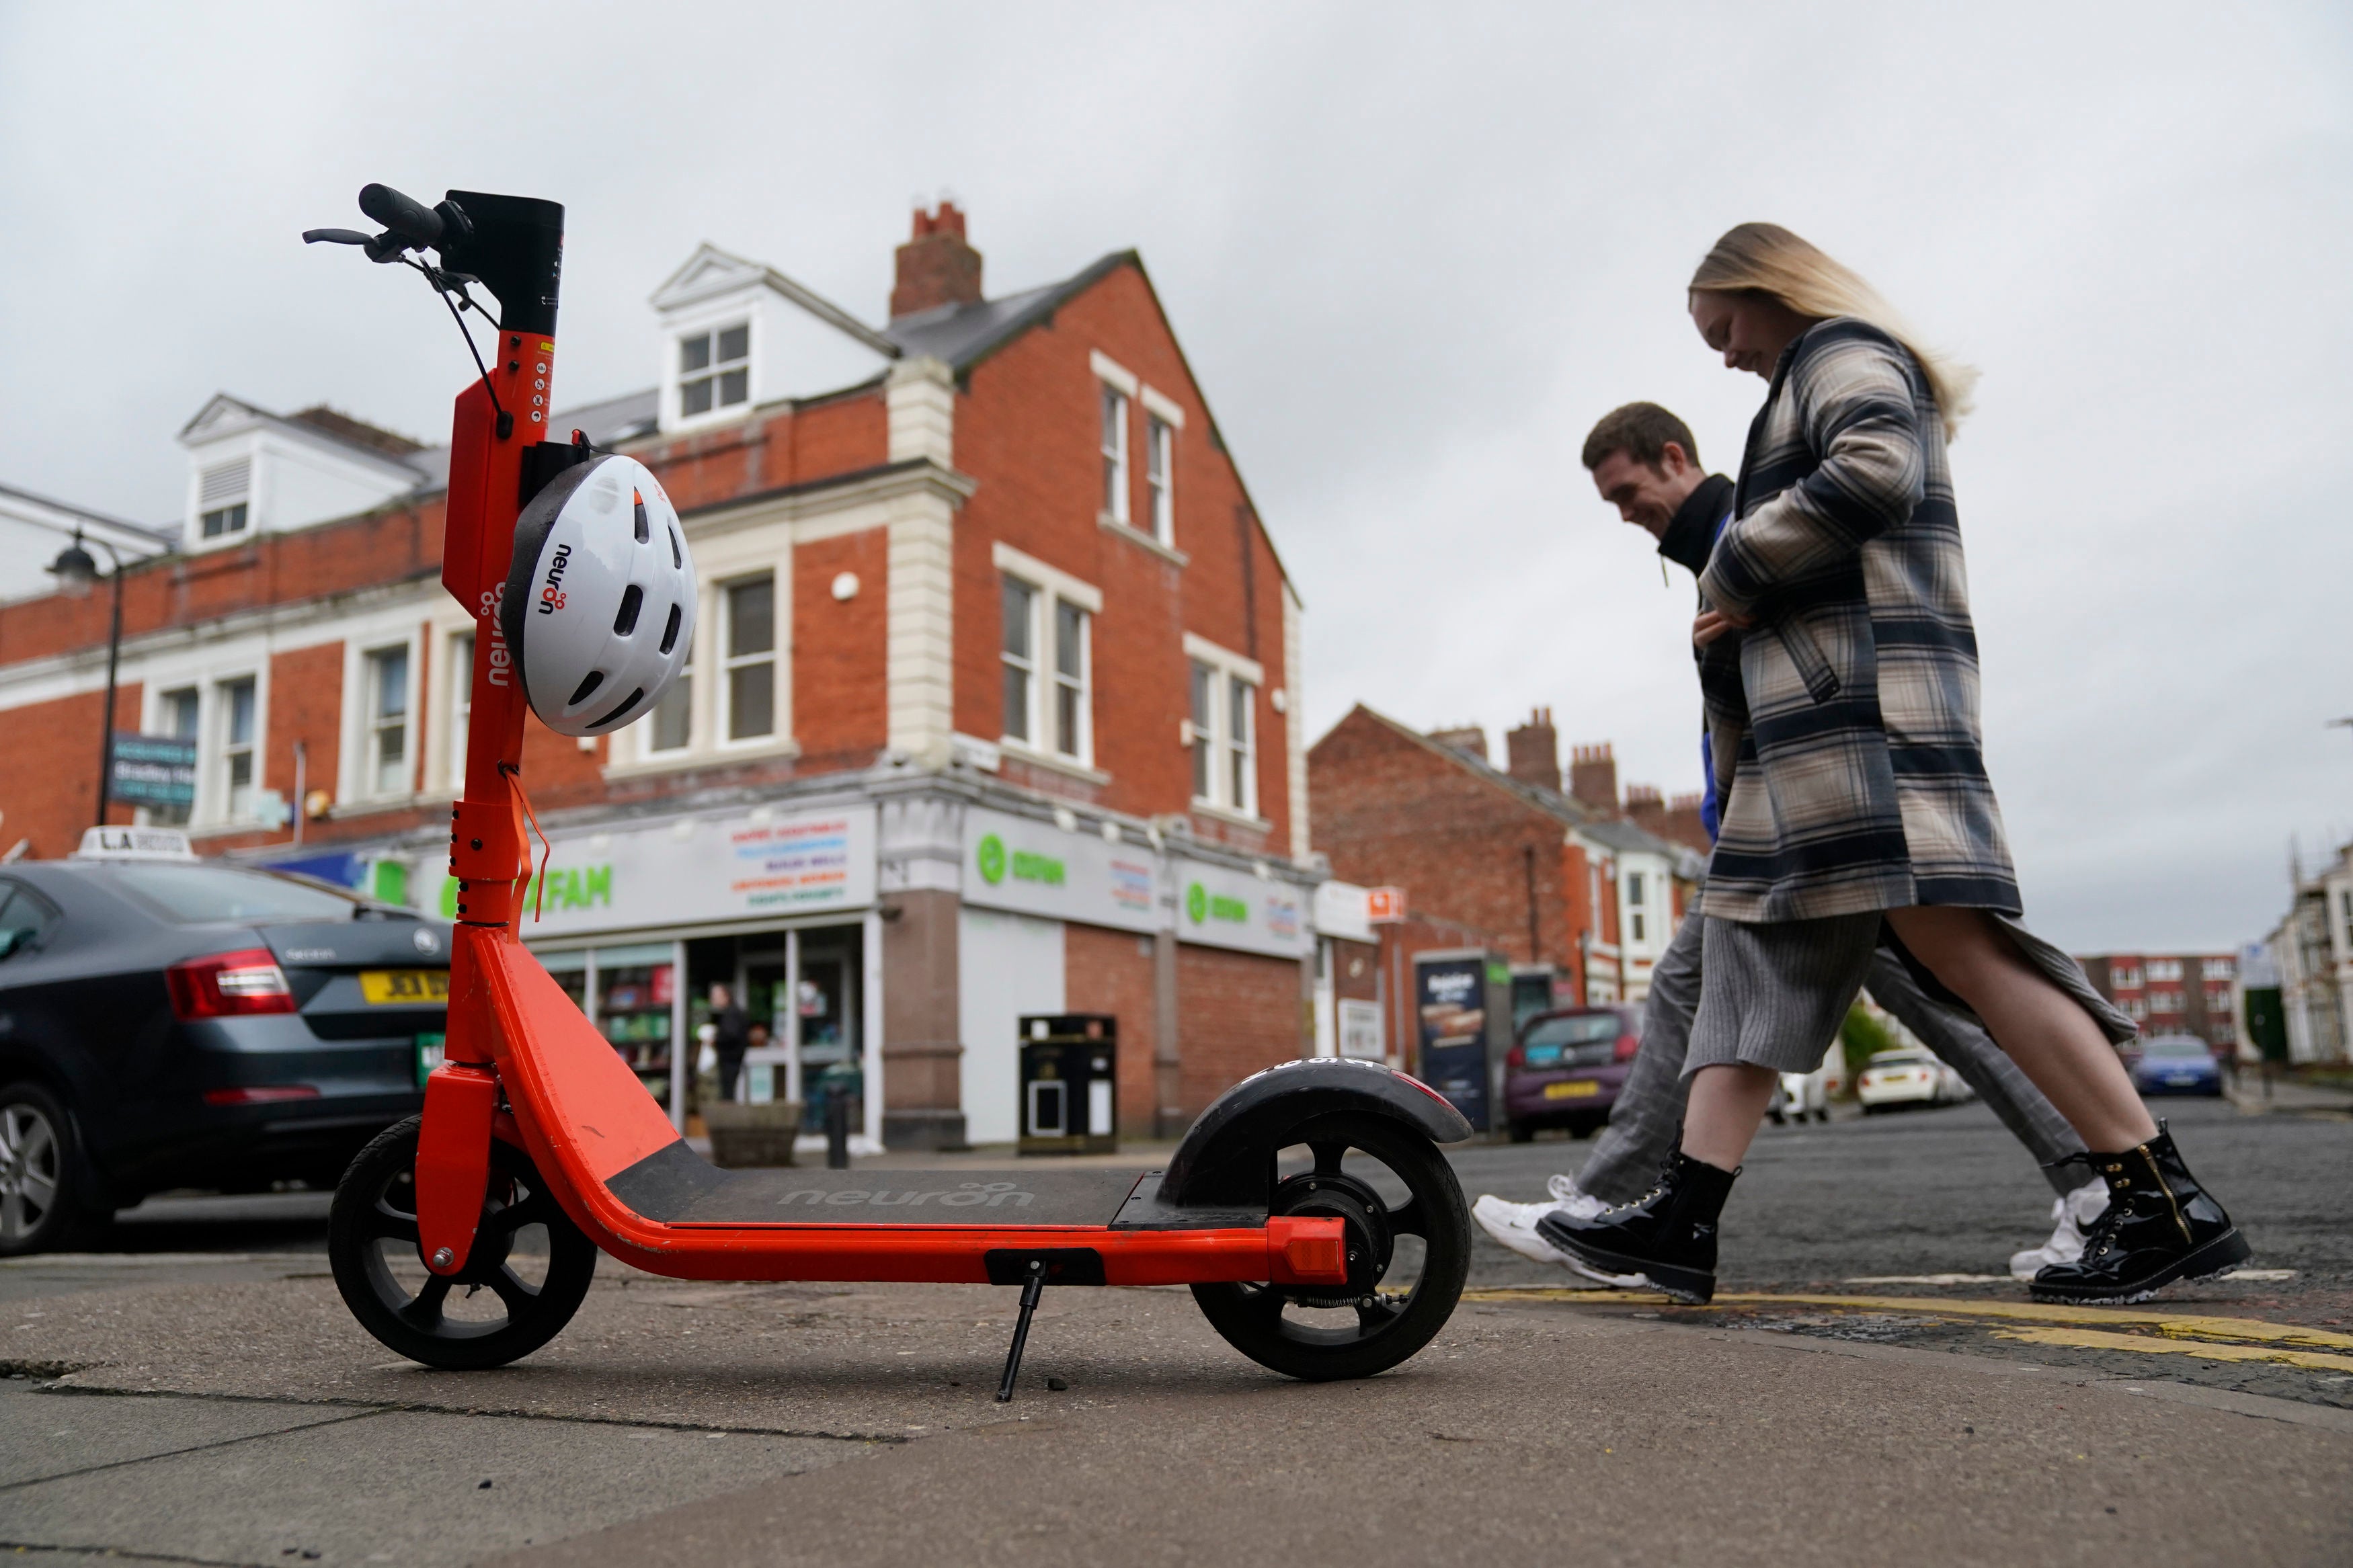 There are about 50 government-backed trials running in towns and cities across the UK, where rented e-scooters can be driven on roads and cycle lanes.